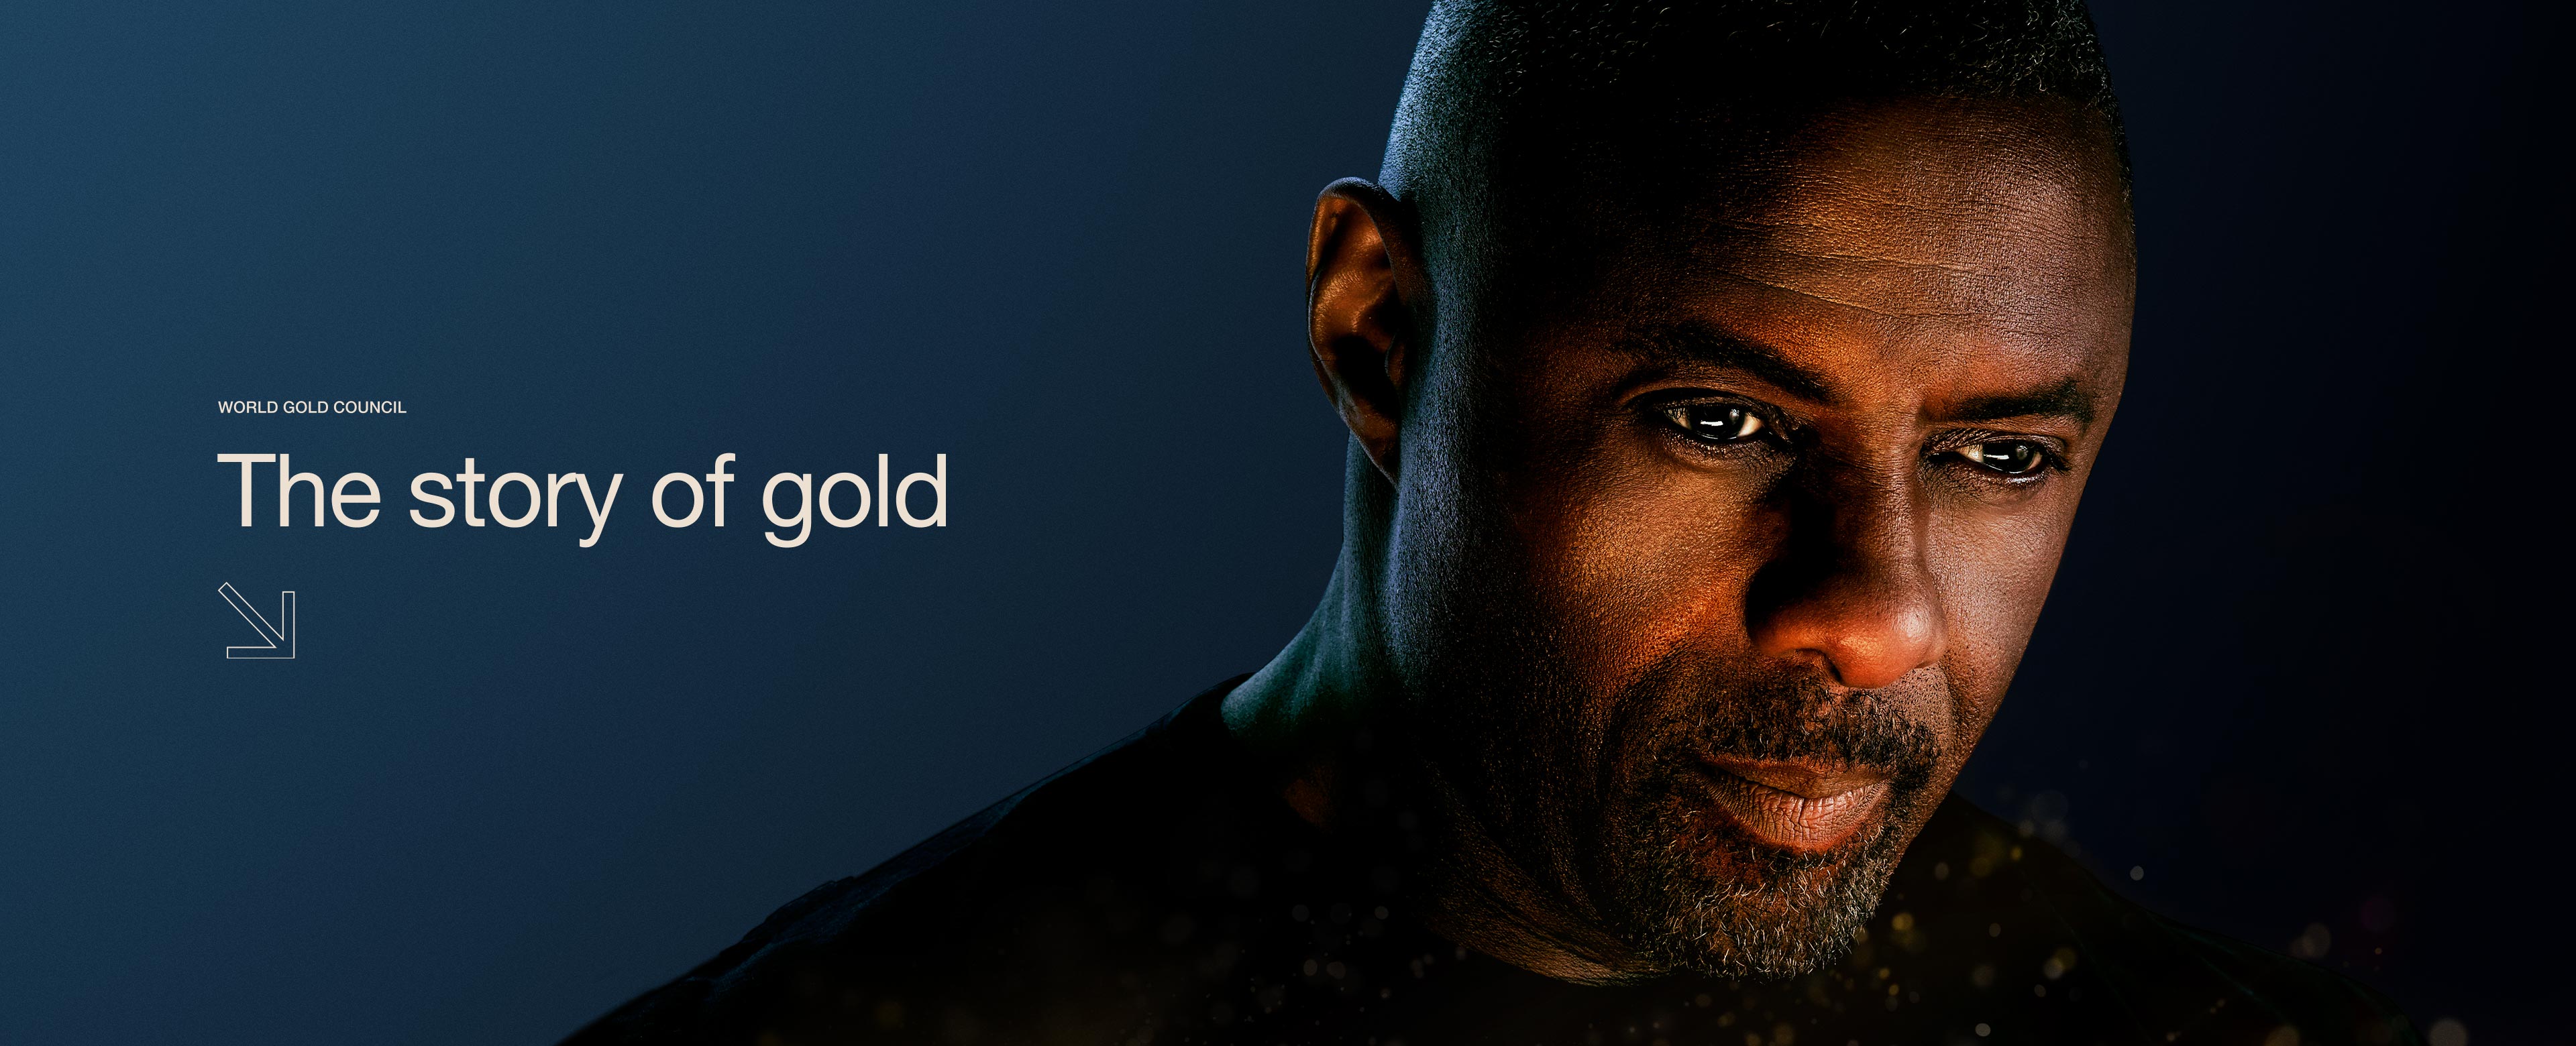 gold-journey-with-idris-elba-projects_thumbs